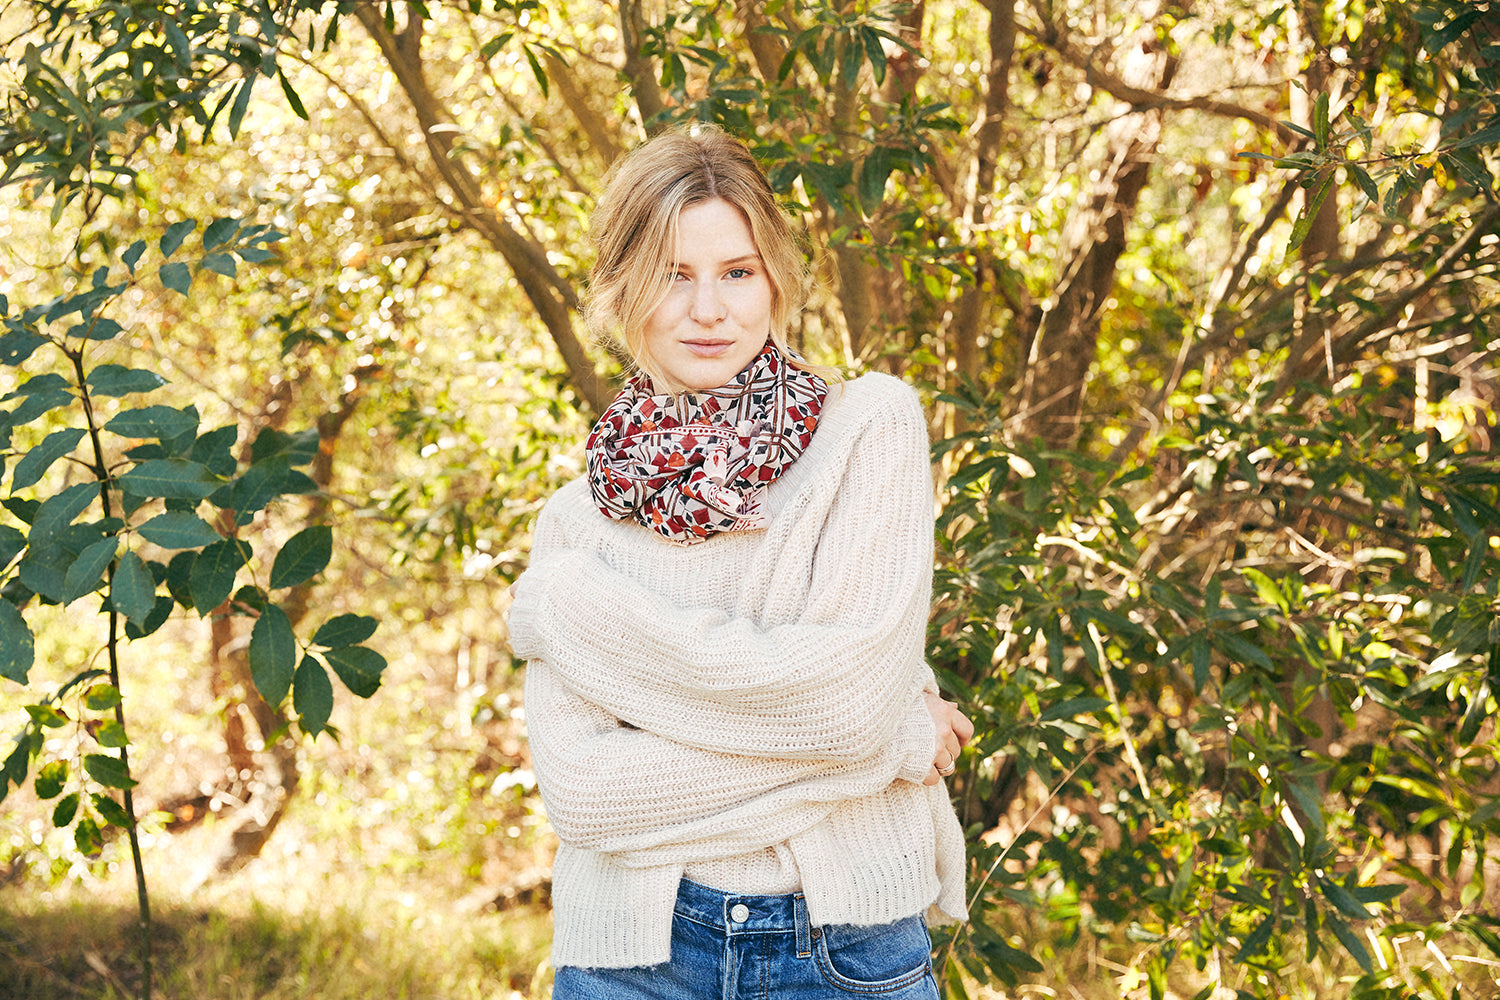 Woman wearing a scarf tied around the neck with a white sweater, blue jeans. Trees in the background.